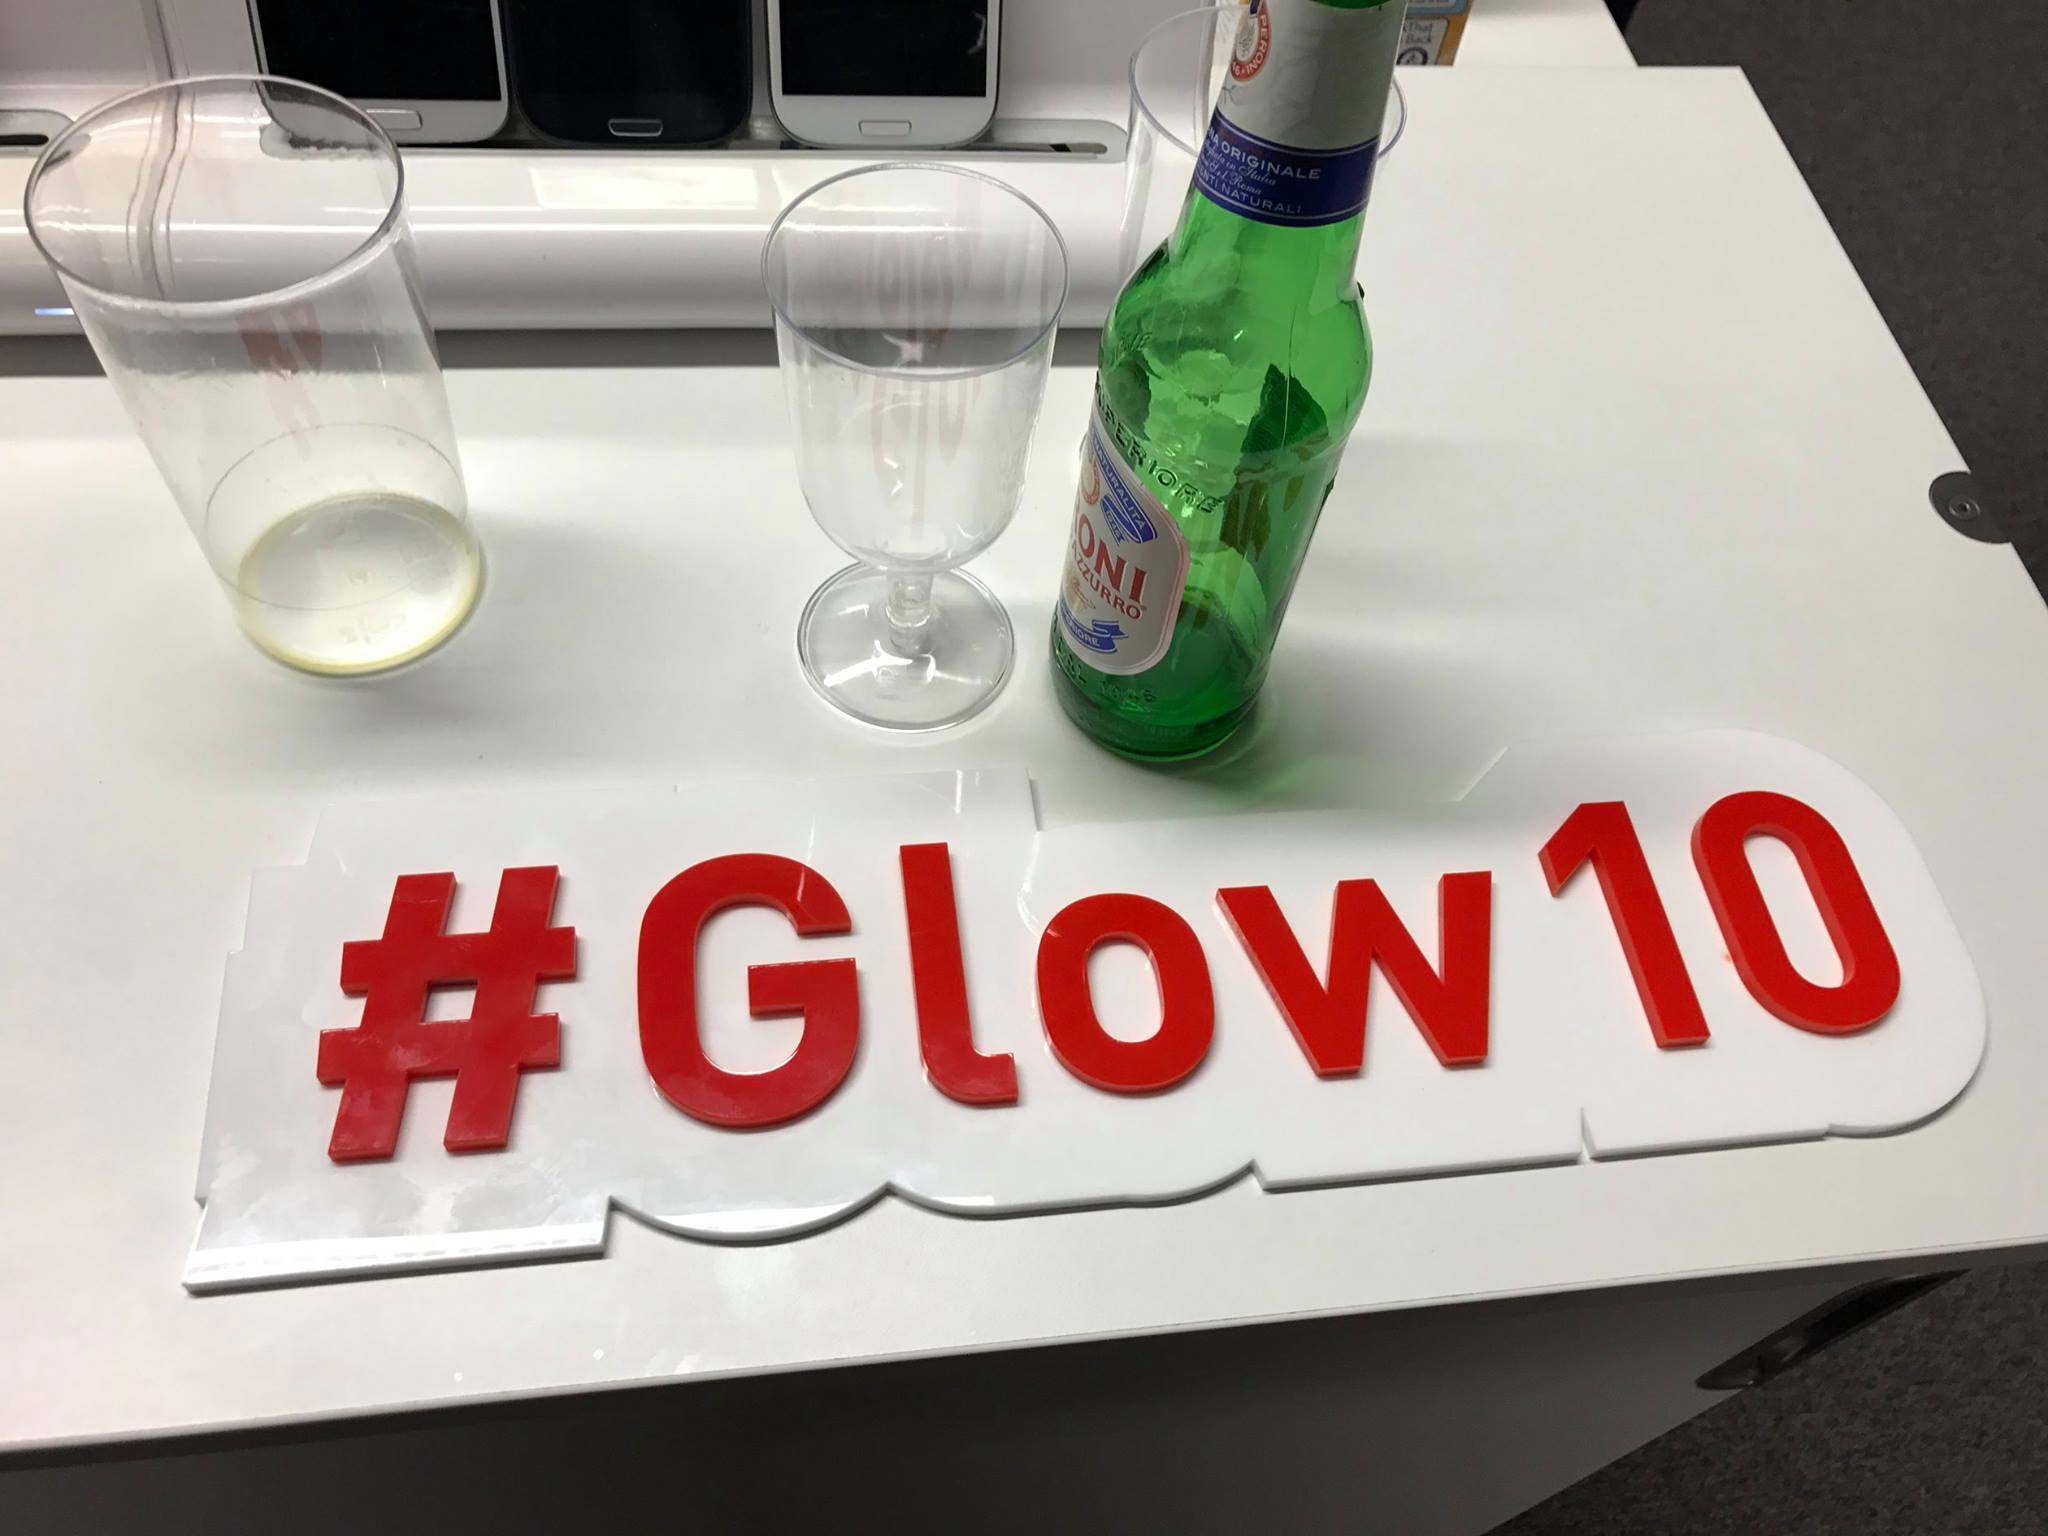 A glow10 sign